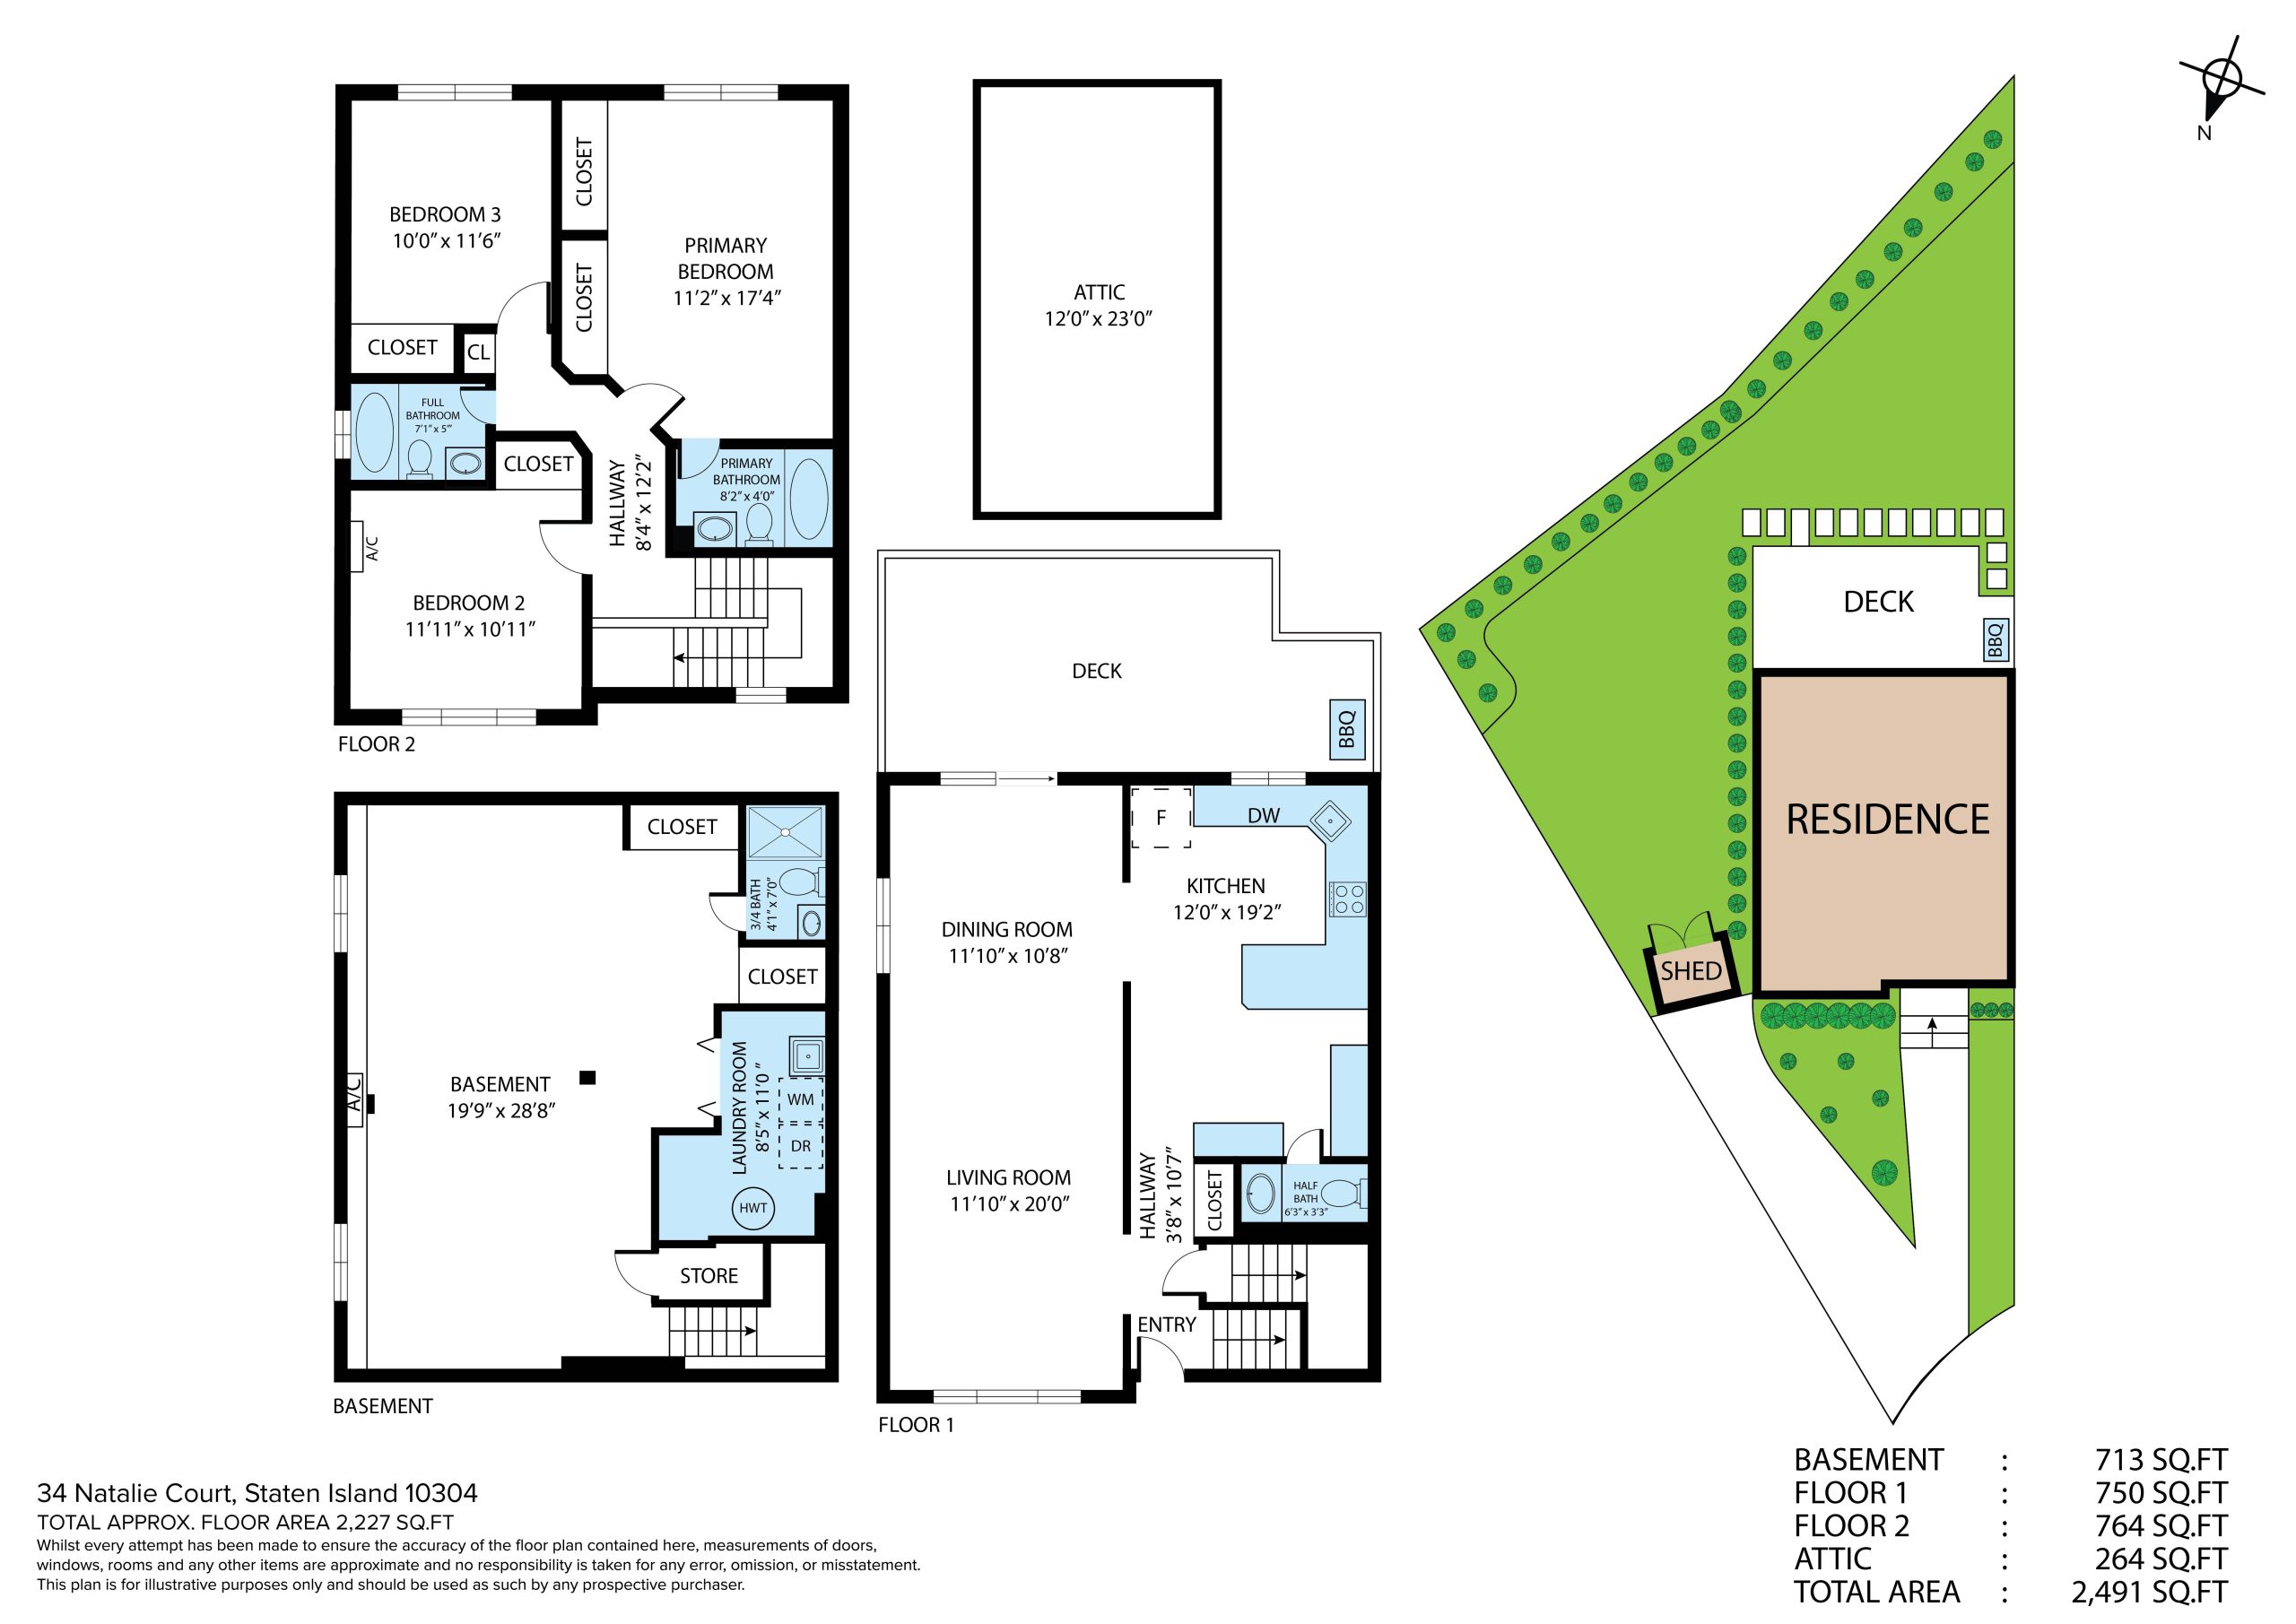 Floorplan of 34 Natalie Court, Staten Island, NY 10304 - a spacious 3-bedroom, 4-bath home featuring a large kitchen, living room, dining room, finished basement and plenty of storage space.